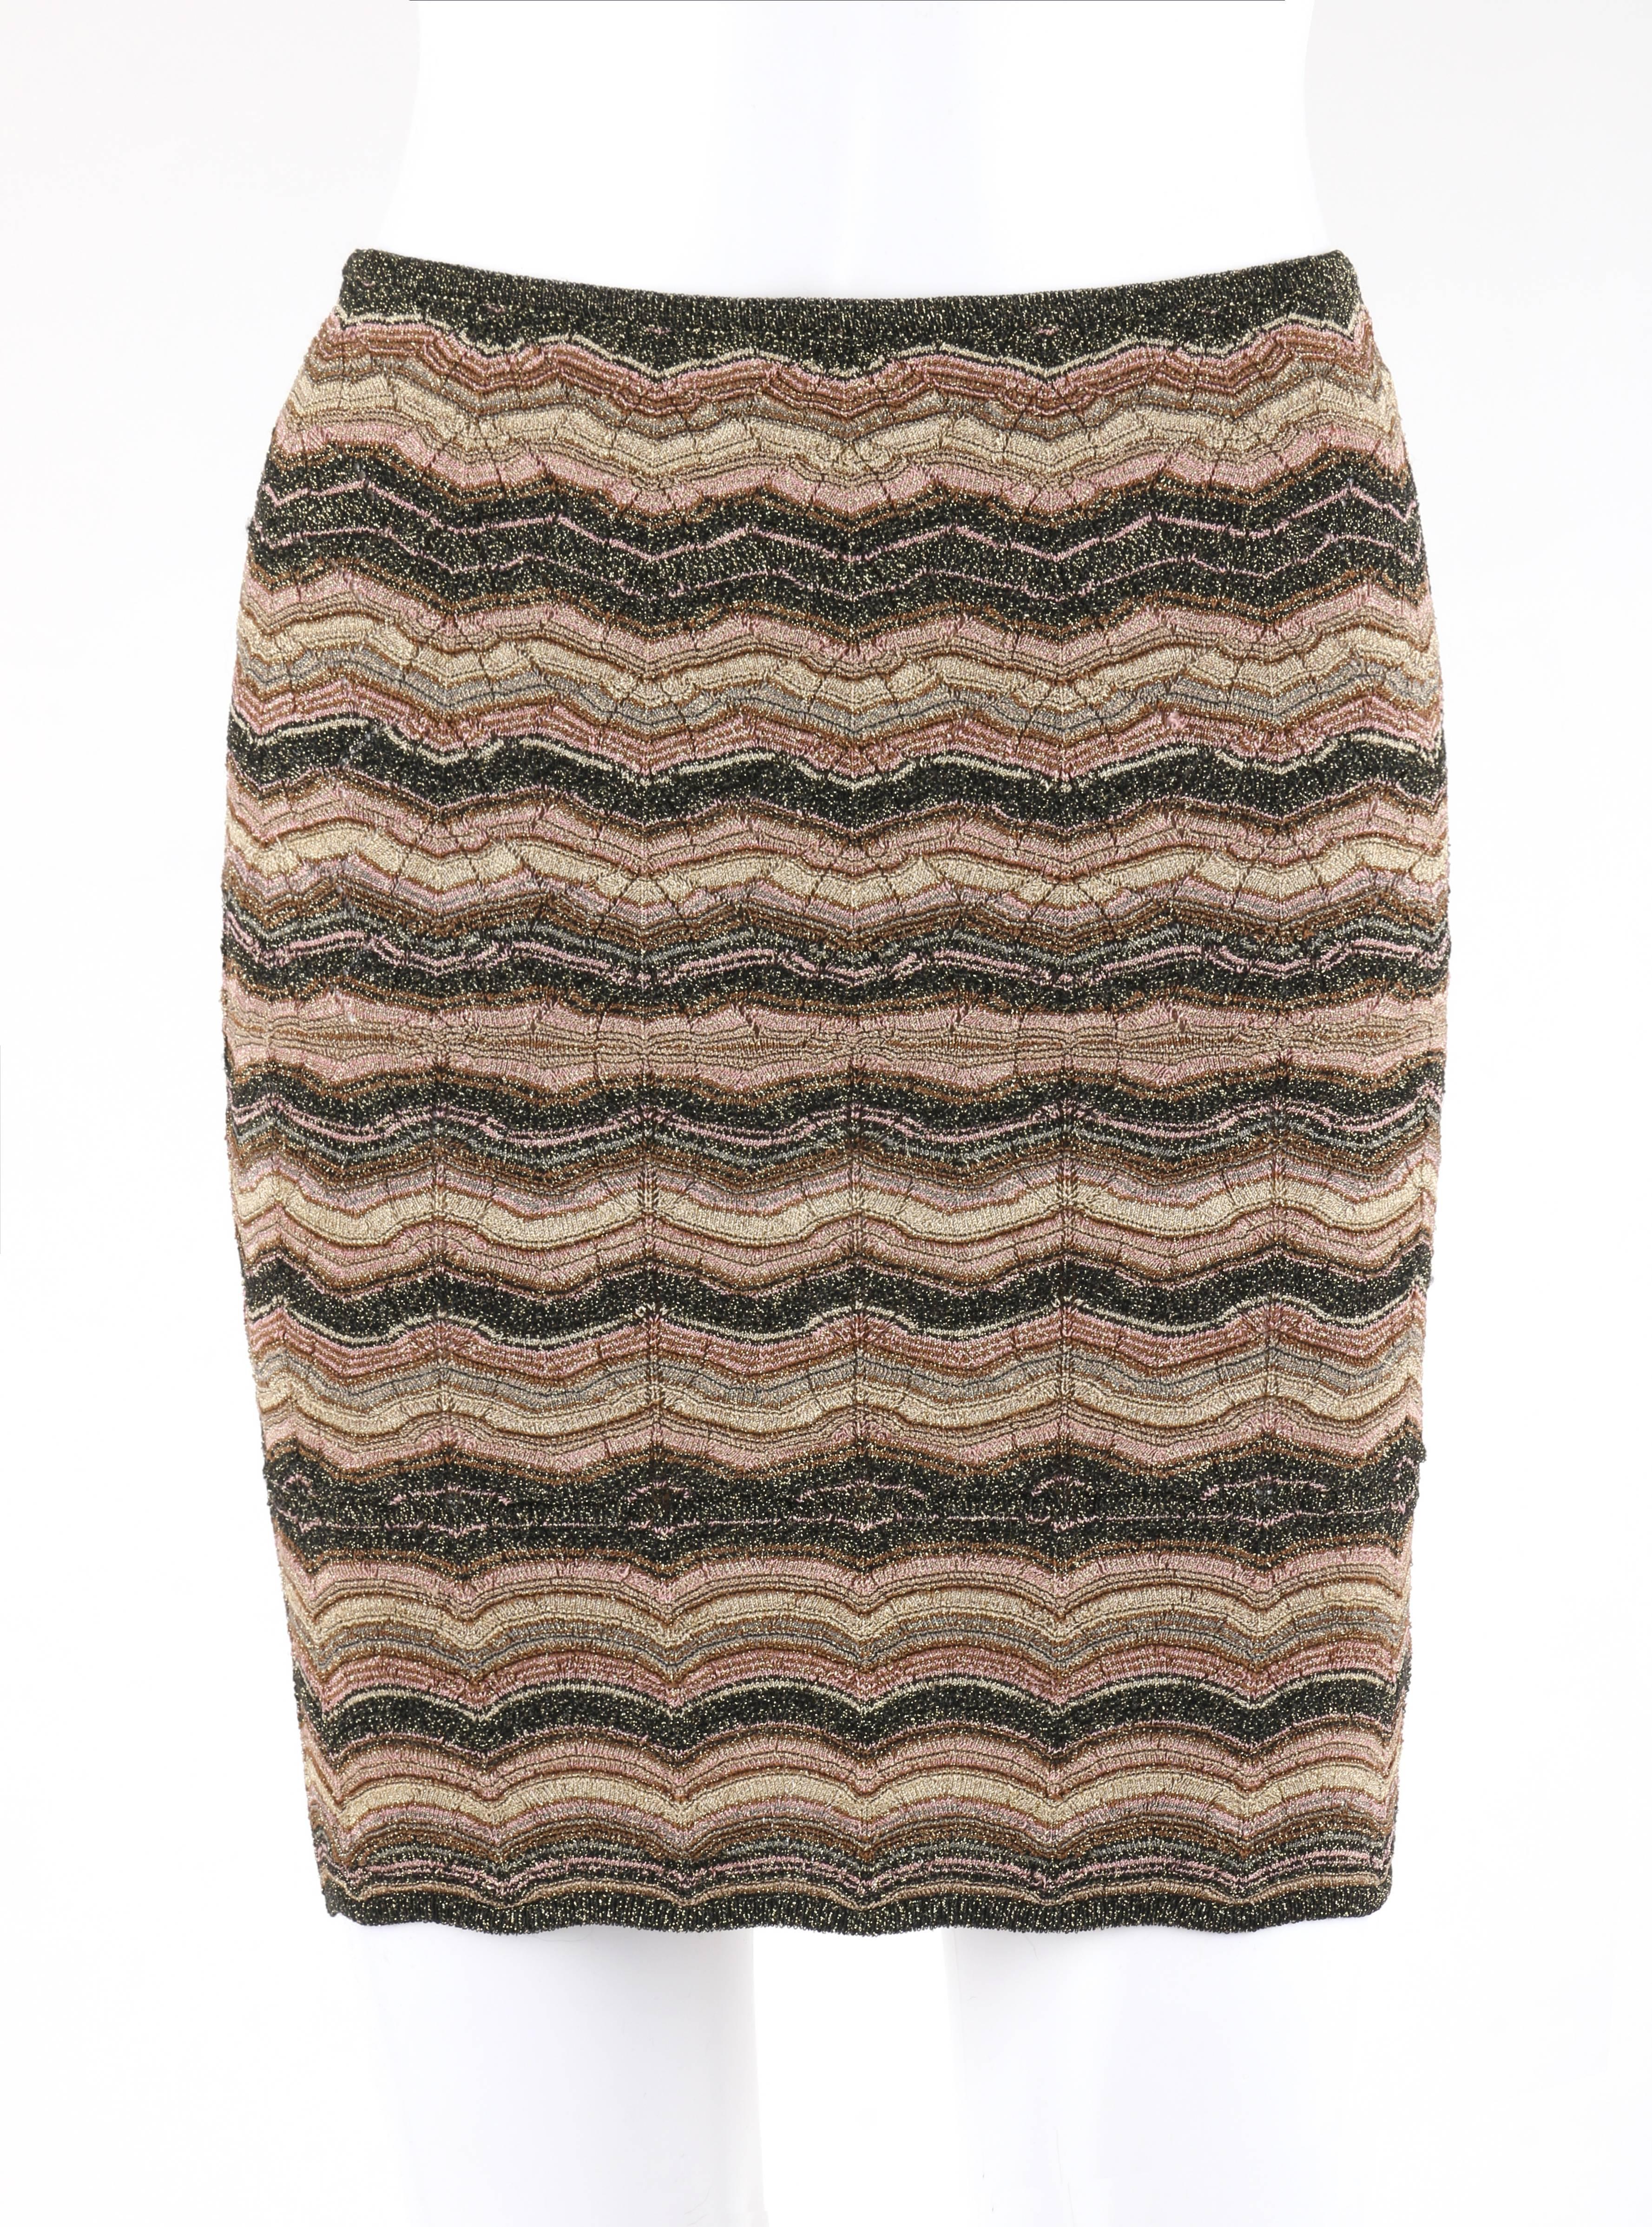 Missoni M metallic knit convertible 3-in-1 pencil skirt tube top cowl neck scarf. Designed by Angela Missoni. Multi-color metallic scallop pattern knit in shades of gold, brown, cream, pink, tan, and black. Slip-on style. Rib knit edge at top and